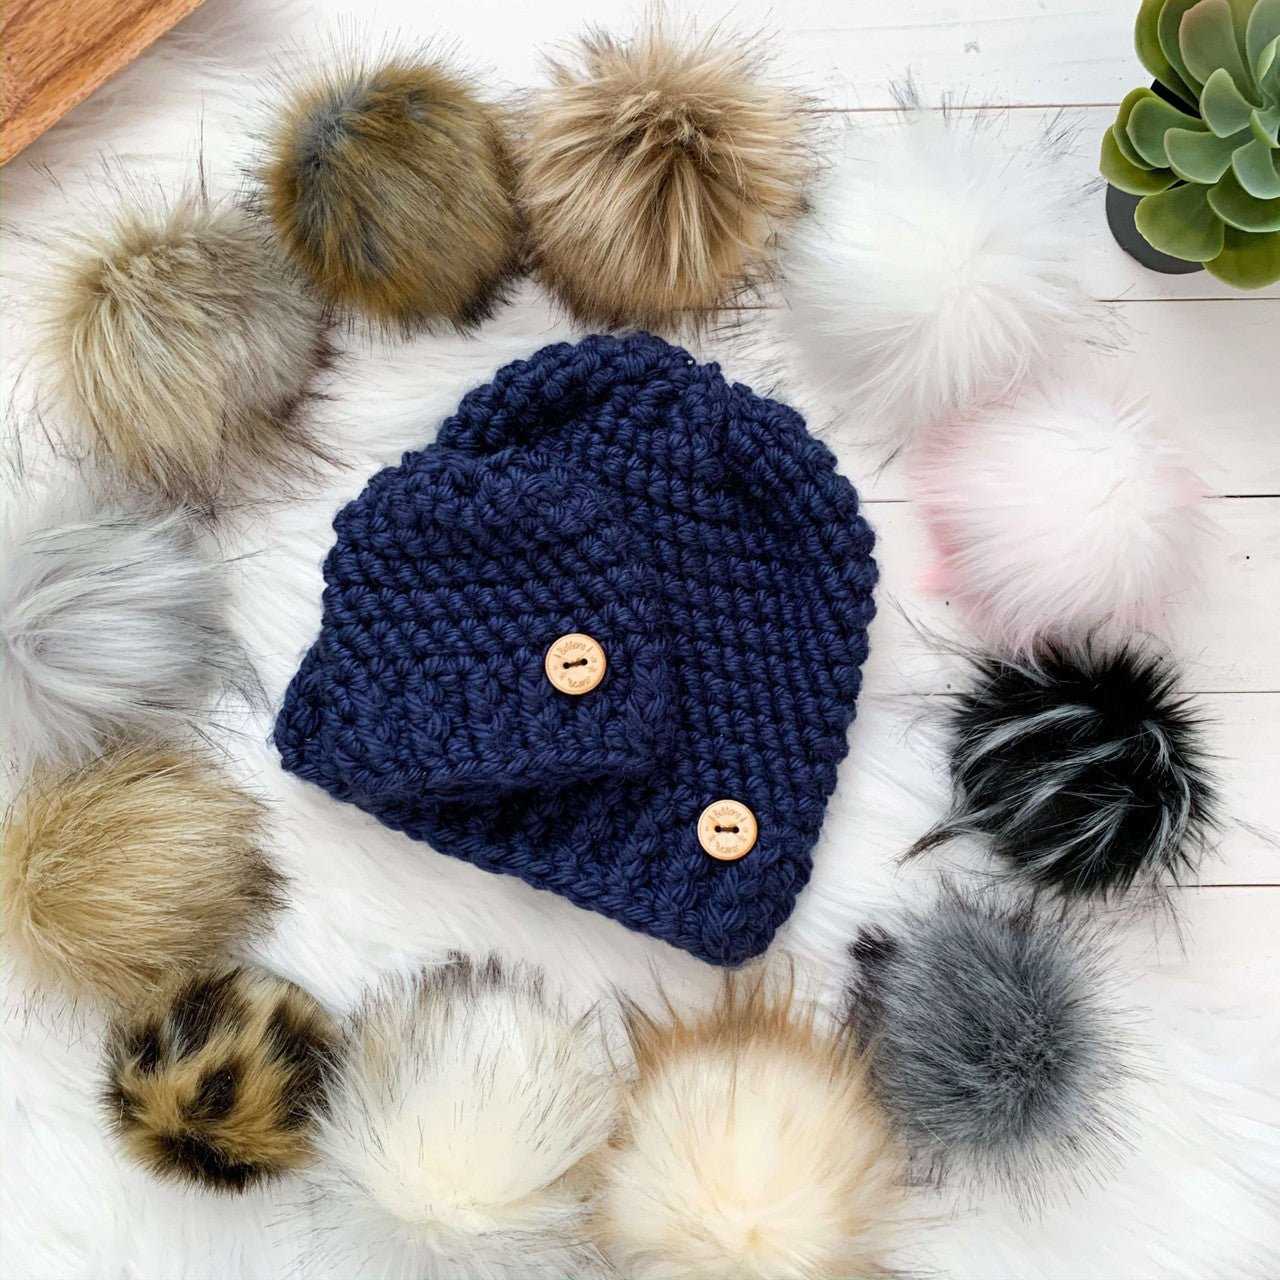 Classic | Baby Vegan Navy Blue Chunky Crochet Hat | Removable Pompom Hats 35 $ Buttons & Beans Co.